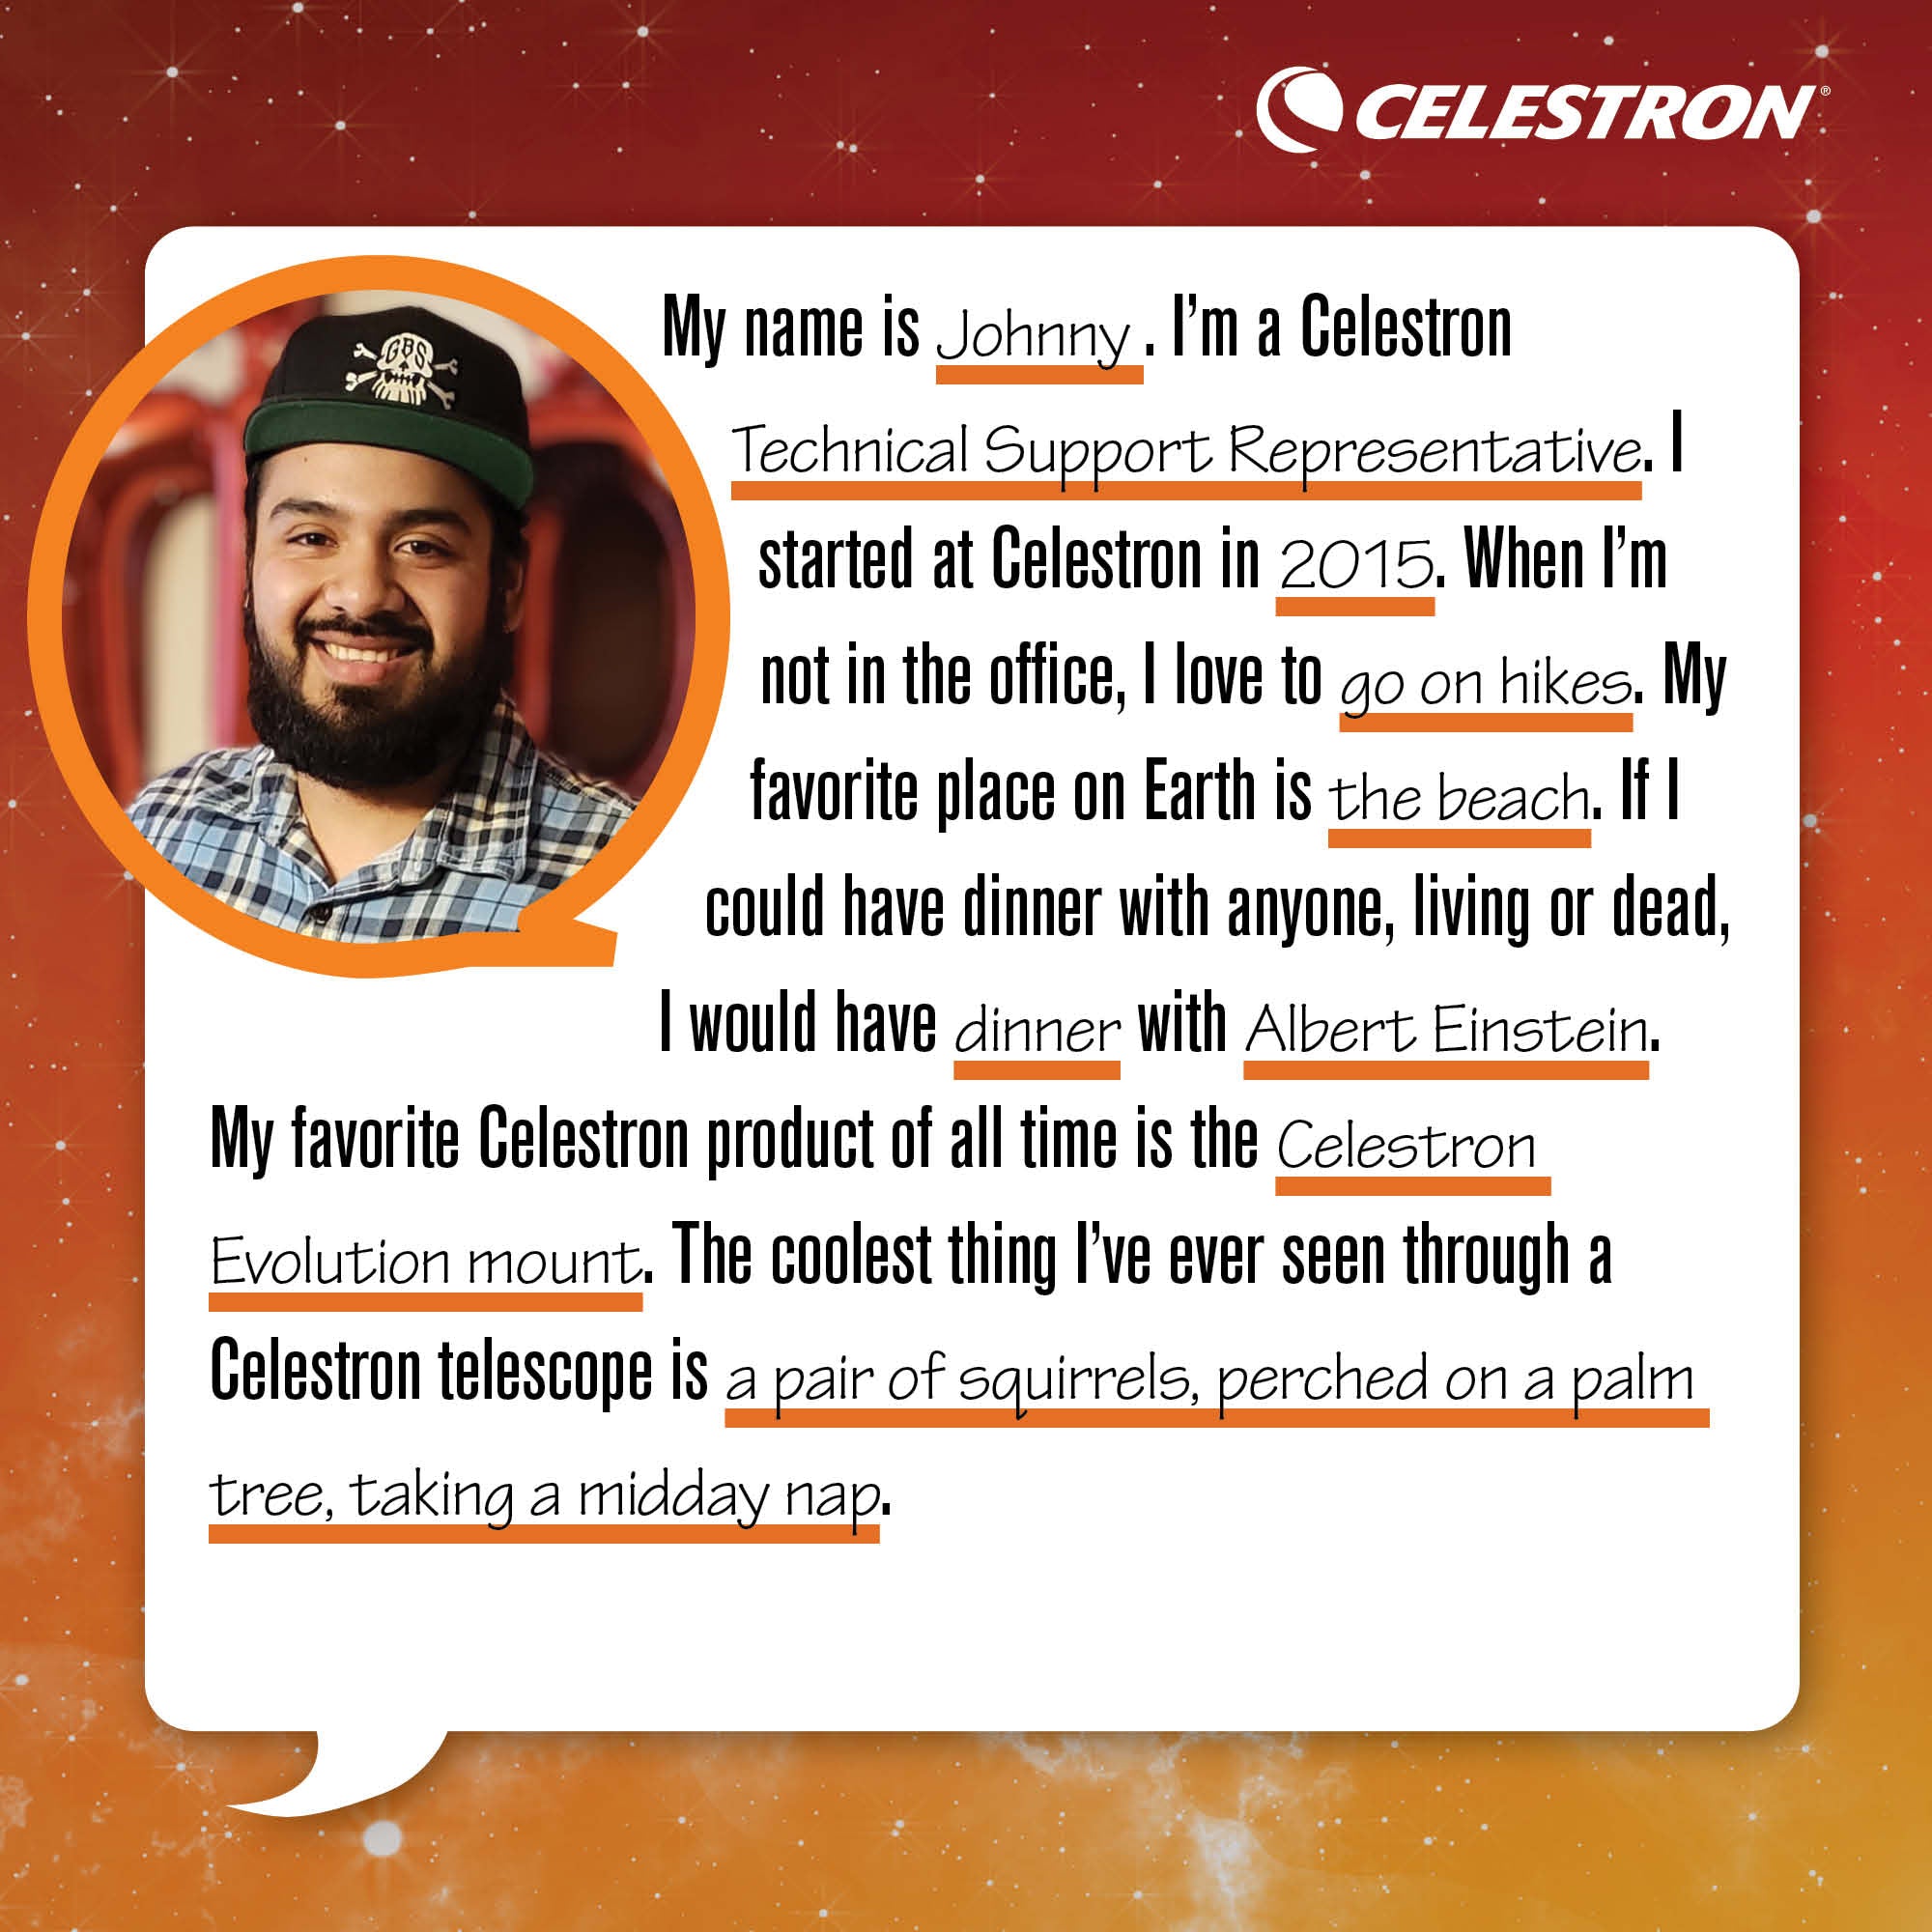 My name is Johnny. I'm Celestron's Technical Support Representative. I started at Celestron in 2015. When I'm not in the office, I love to go on hikes.  My favorite place on Earth is the beach. If I could have dinner with anyone, living or dead, I would have dinner with Albert Einstein. My favorite Celestron product of all time is the Celestron Evolution mount. The coolest thing I've ever seen through a Celestron telescope is a pair of squirrels, perched on a palm tree, taking a midday nap.